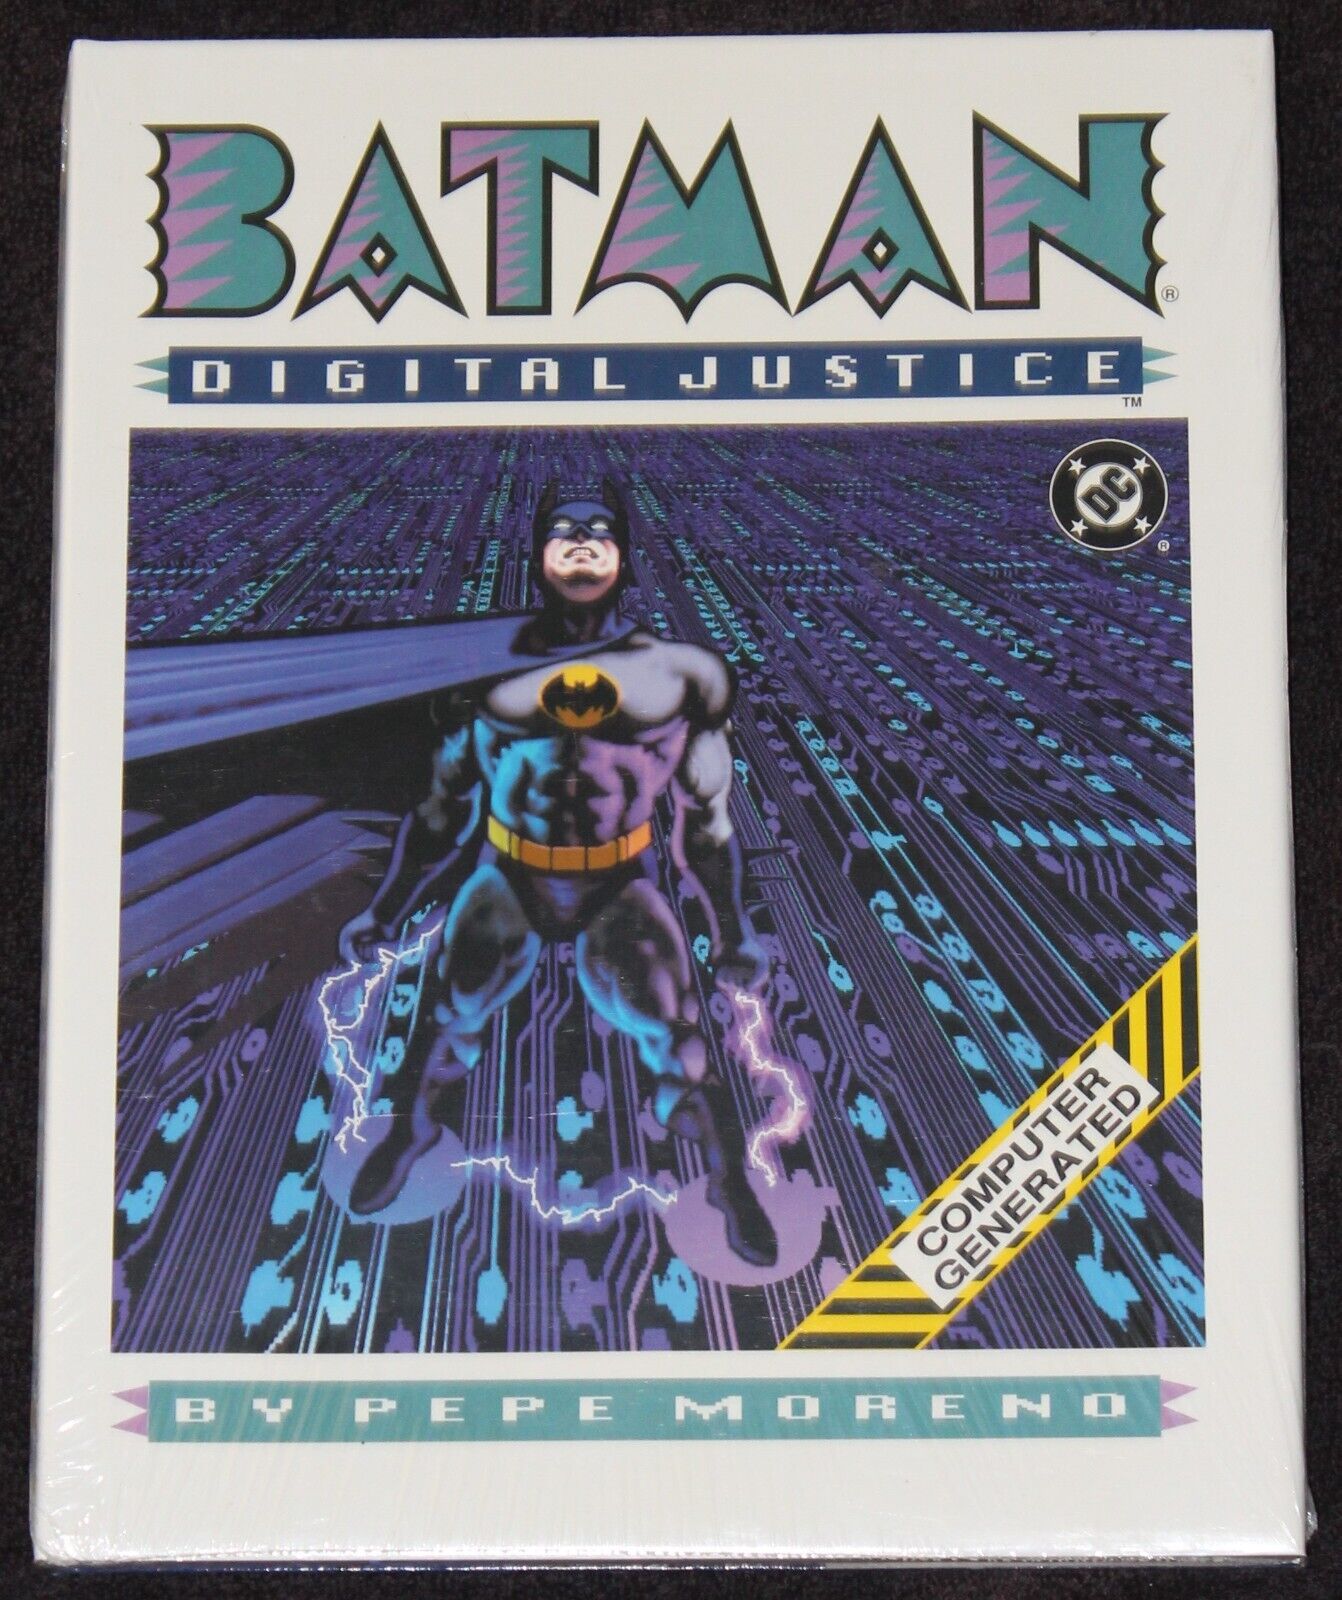 Batman Digital Justice, Published 1990; First Computer Generated Graphic Novel